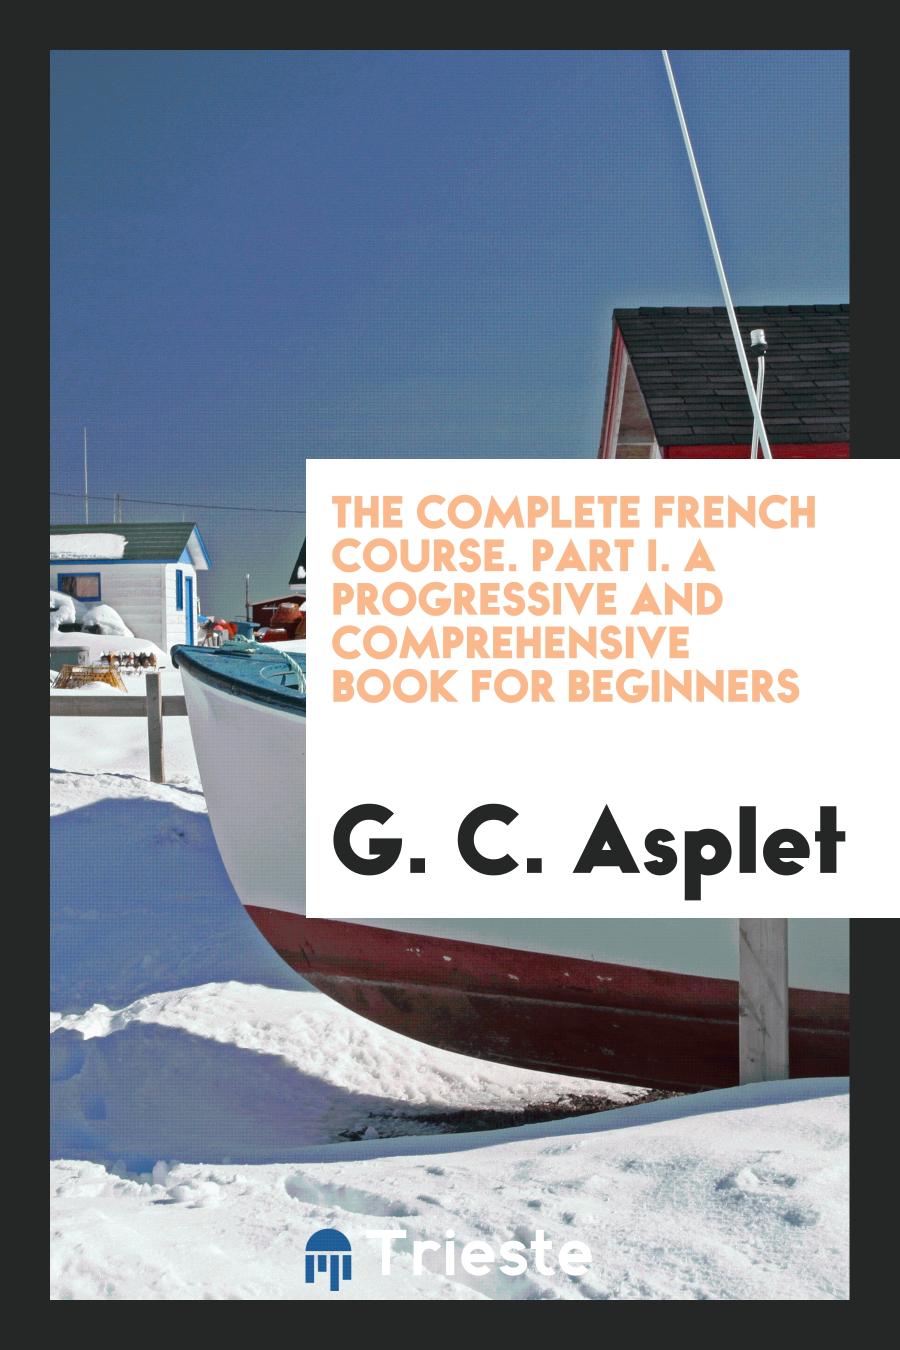 The Complete French Course. Part I. A Progressive and Comprehensive Book for Beginners